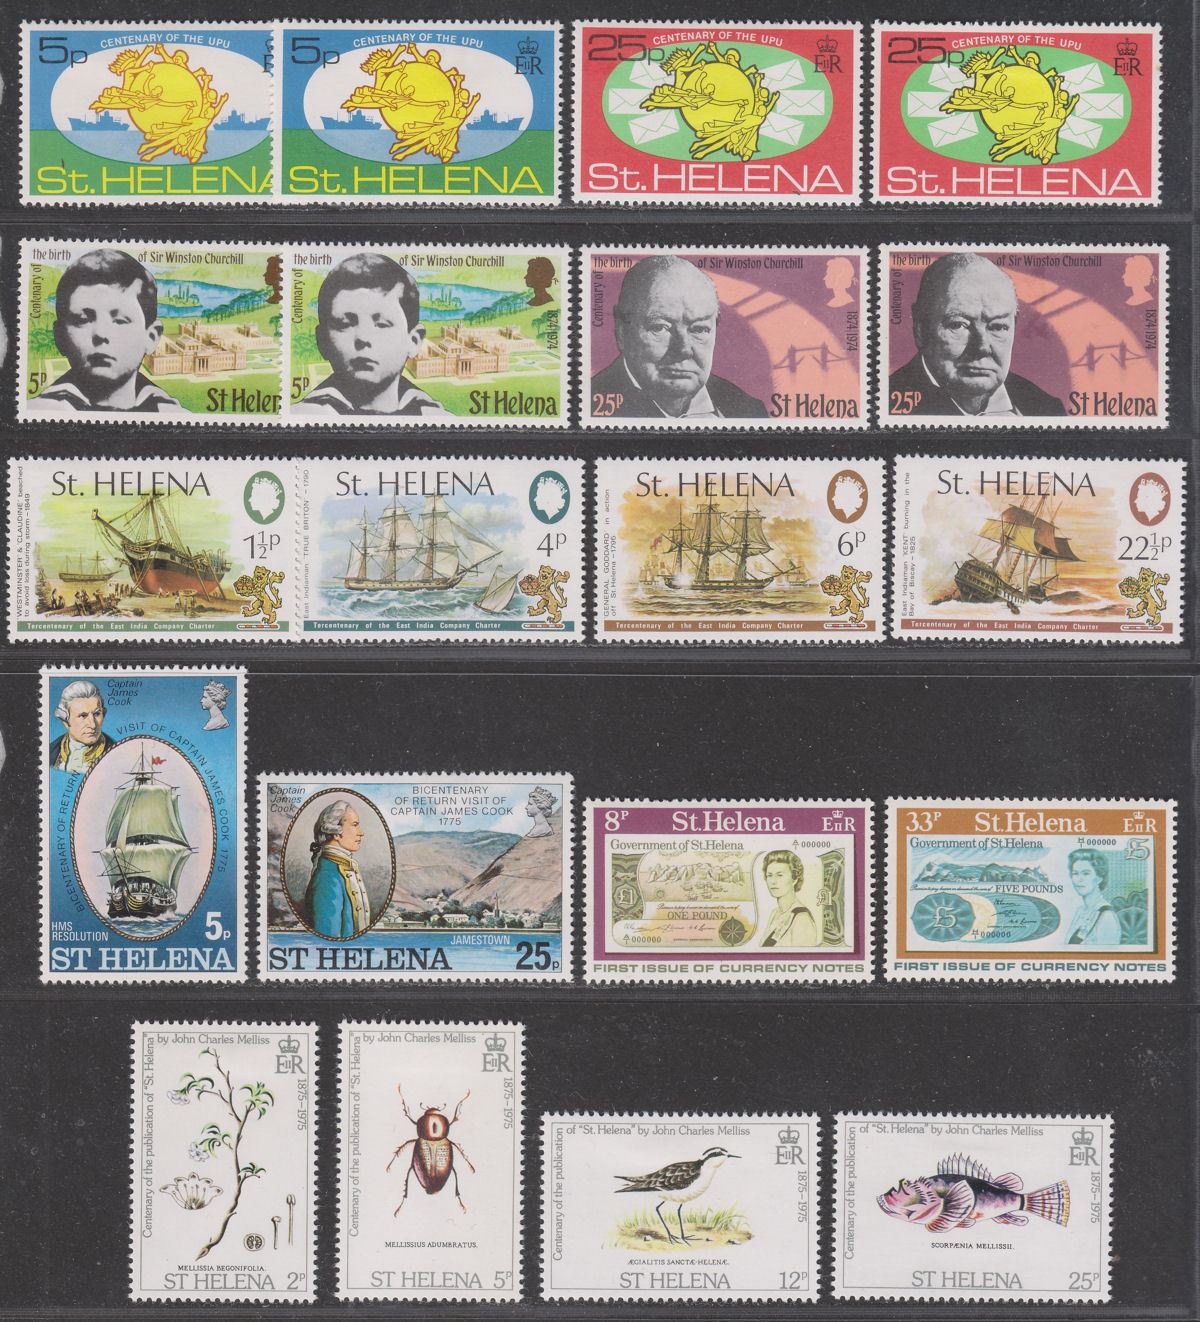 St Helena 1970-77 QEII Selection Mint incl Dickens, Military Equipment, Halley